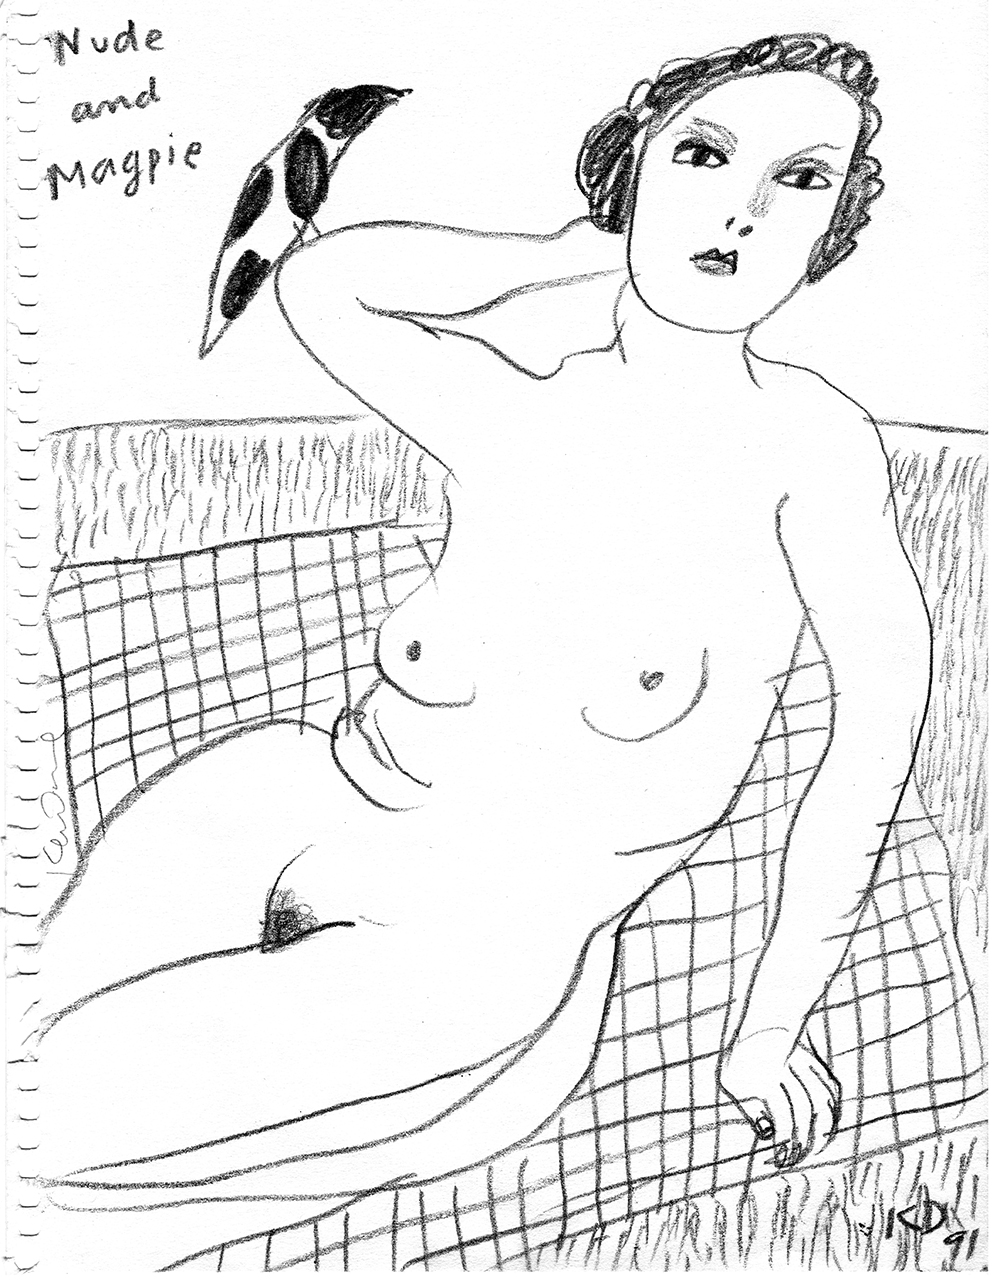 Nude and magpie